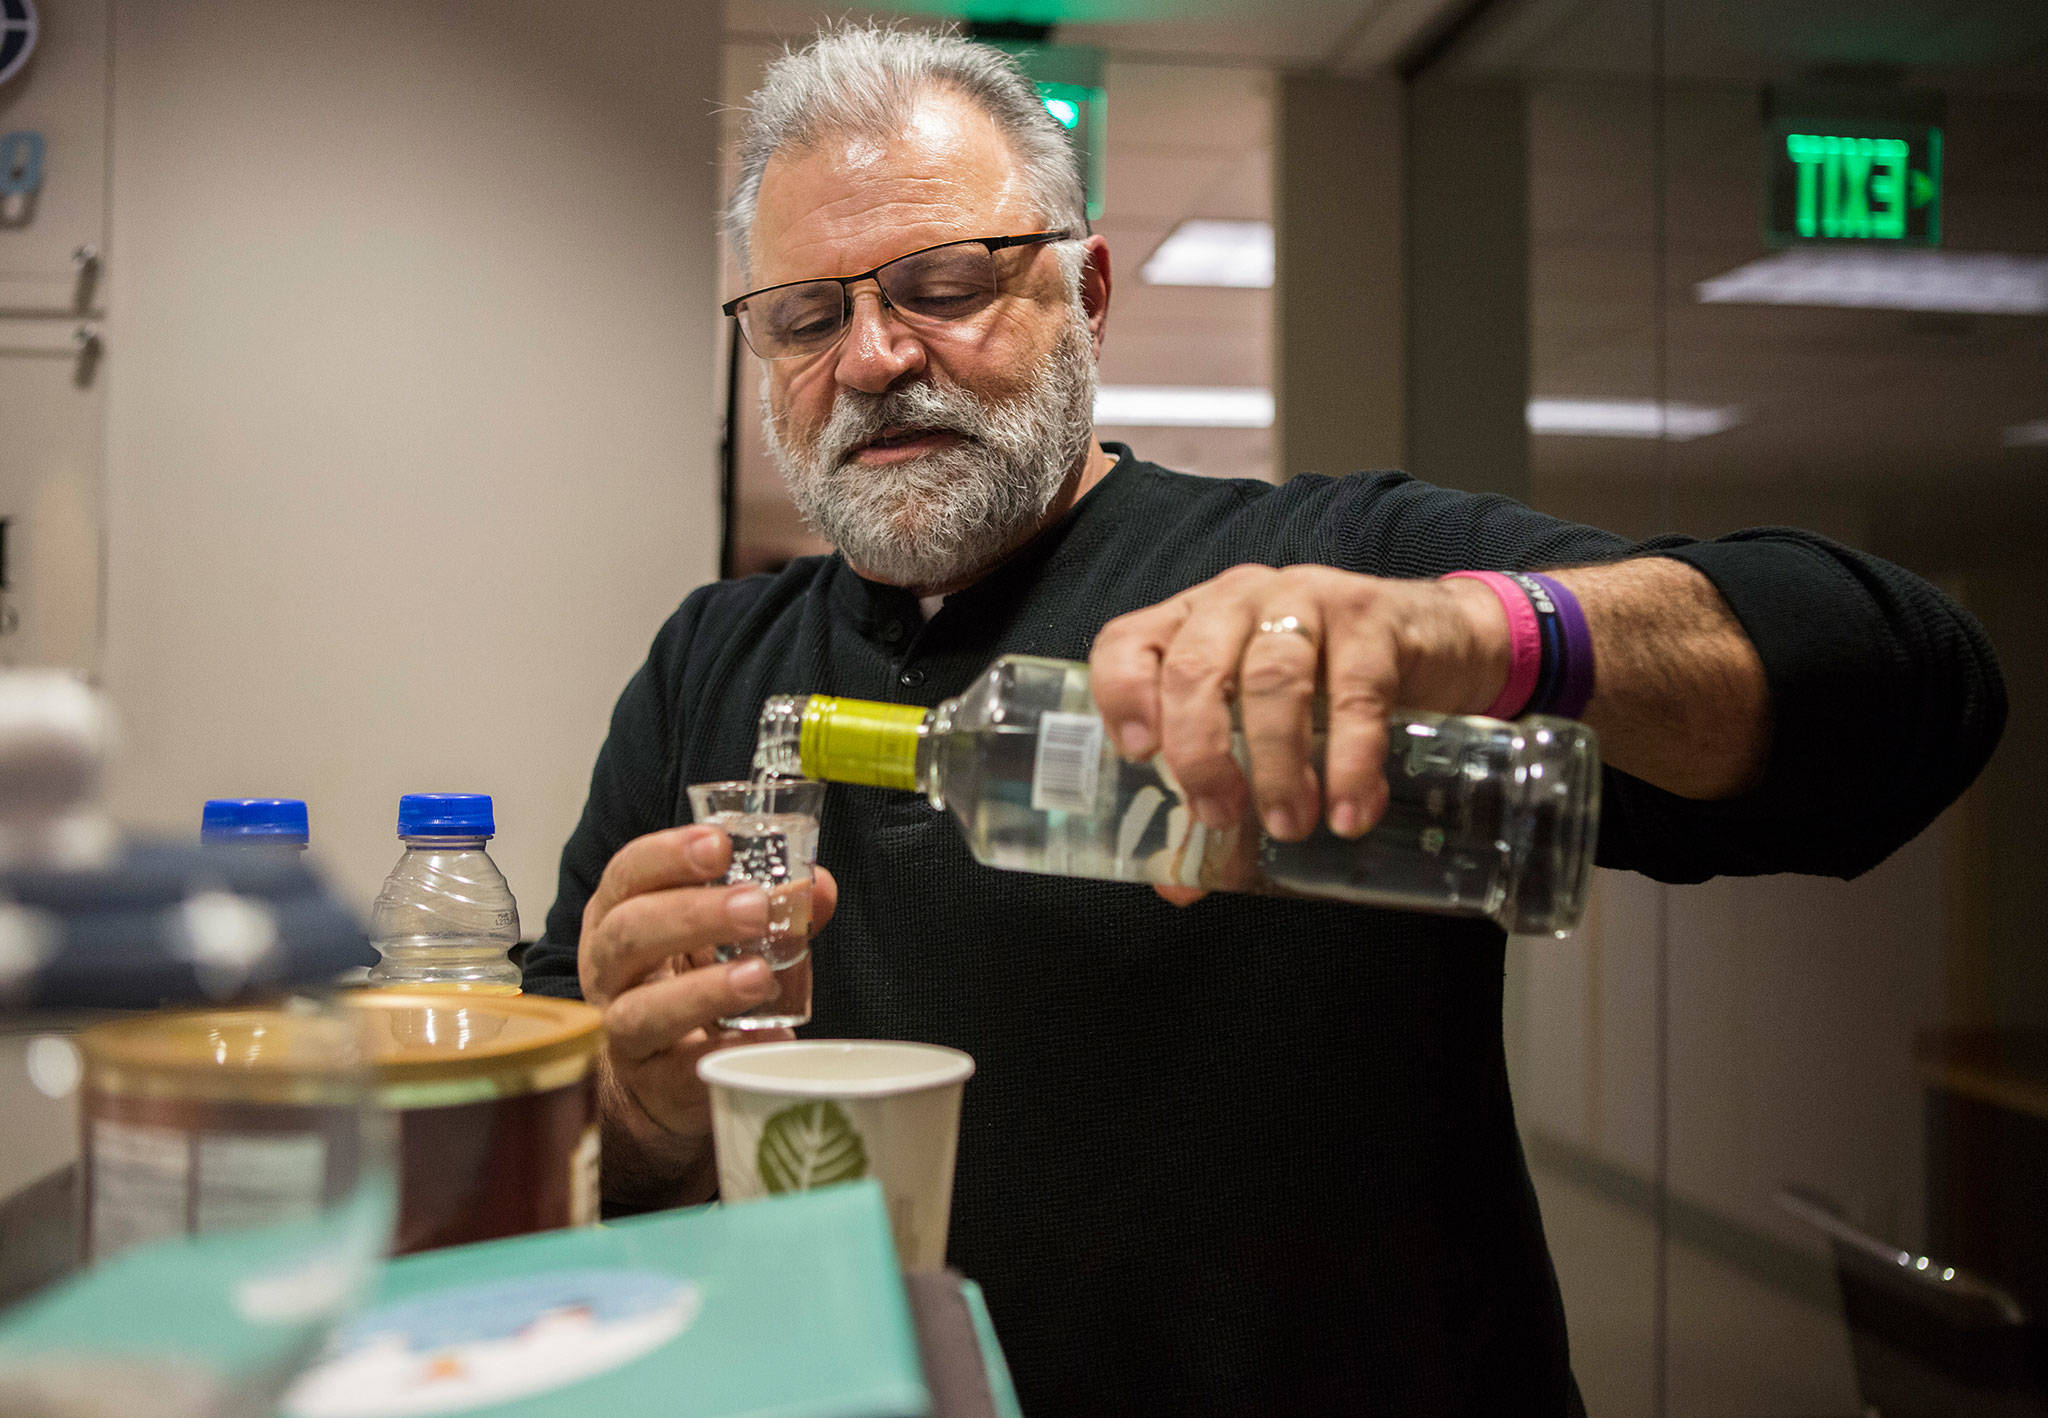 Radio host Maury Eskenazi makes his fourth drink during the annual “DUI Awareness Show” at the KRKO 1380 AM office in Everett. (Olivia Vanni / The Herald)